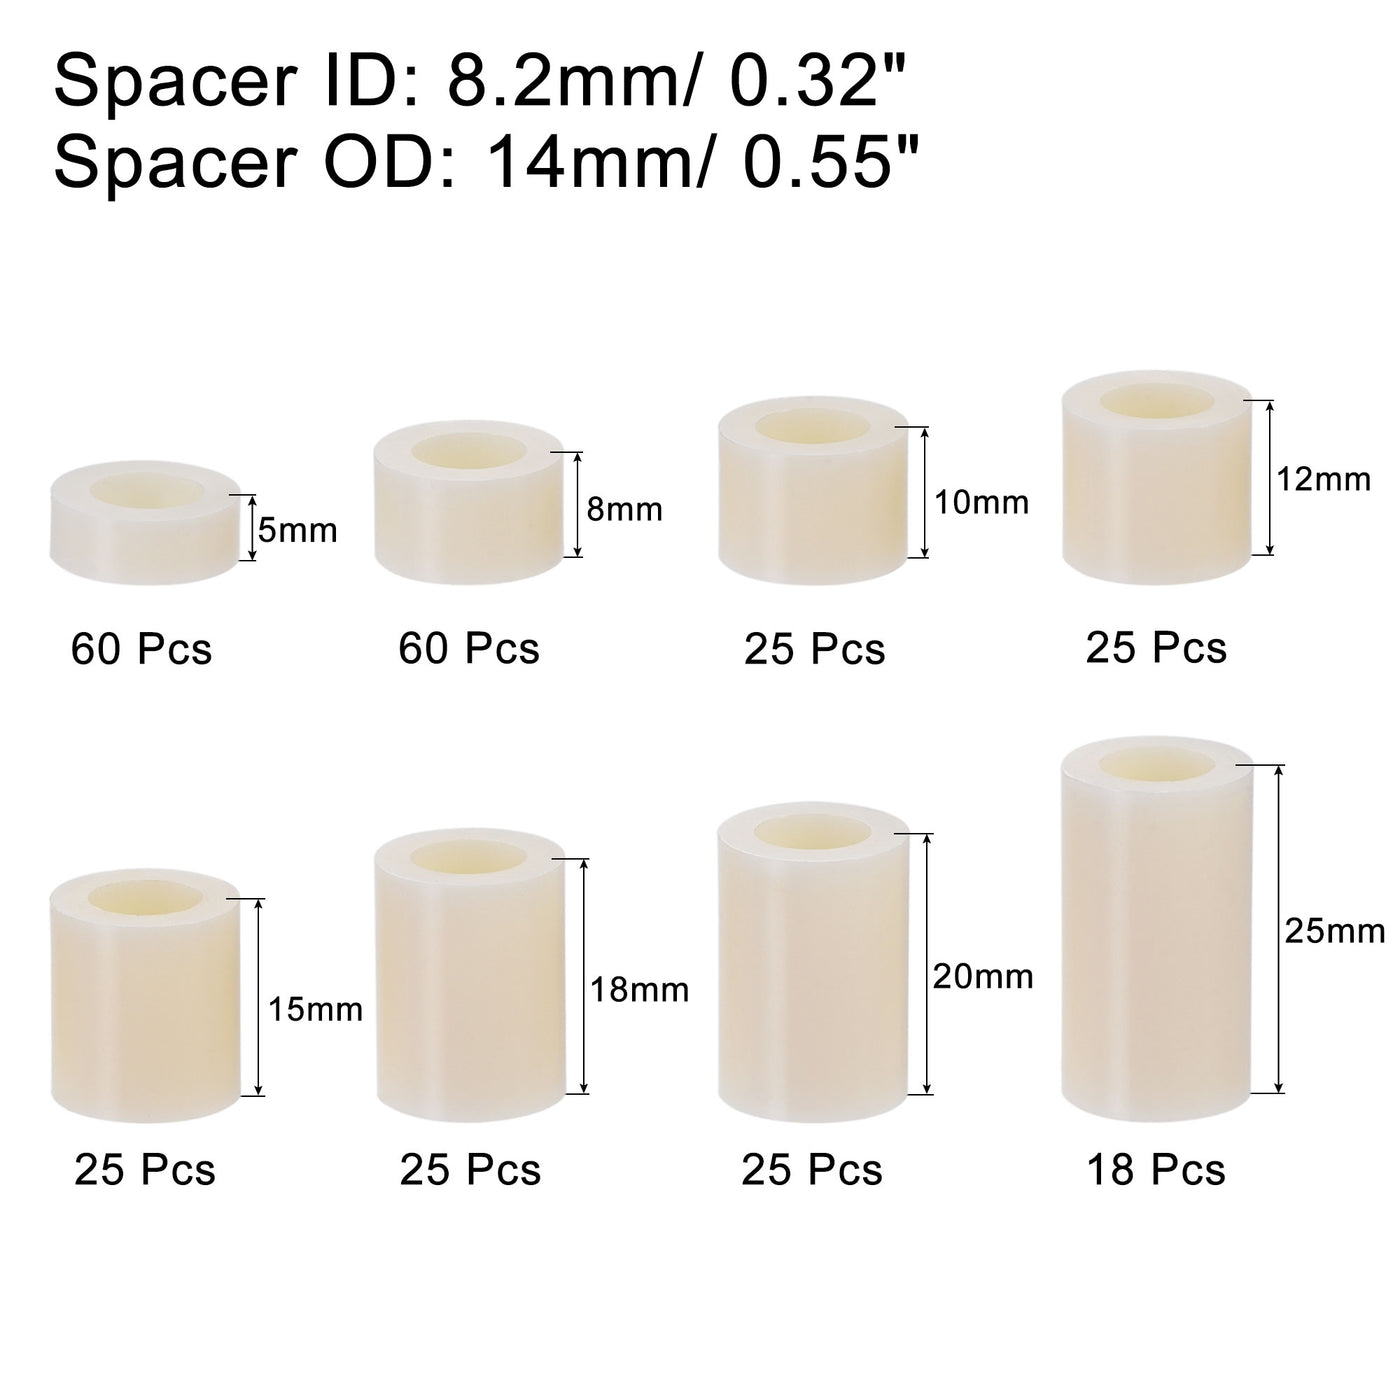 uxcell Uxcell ABS Round Spacer Assortment Kit ID 8.2mm OD 14mm, 8 Sizes Standoff, 263pcs